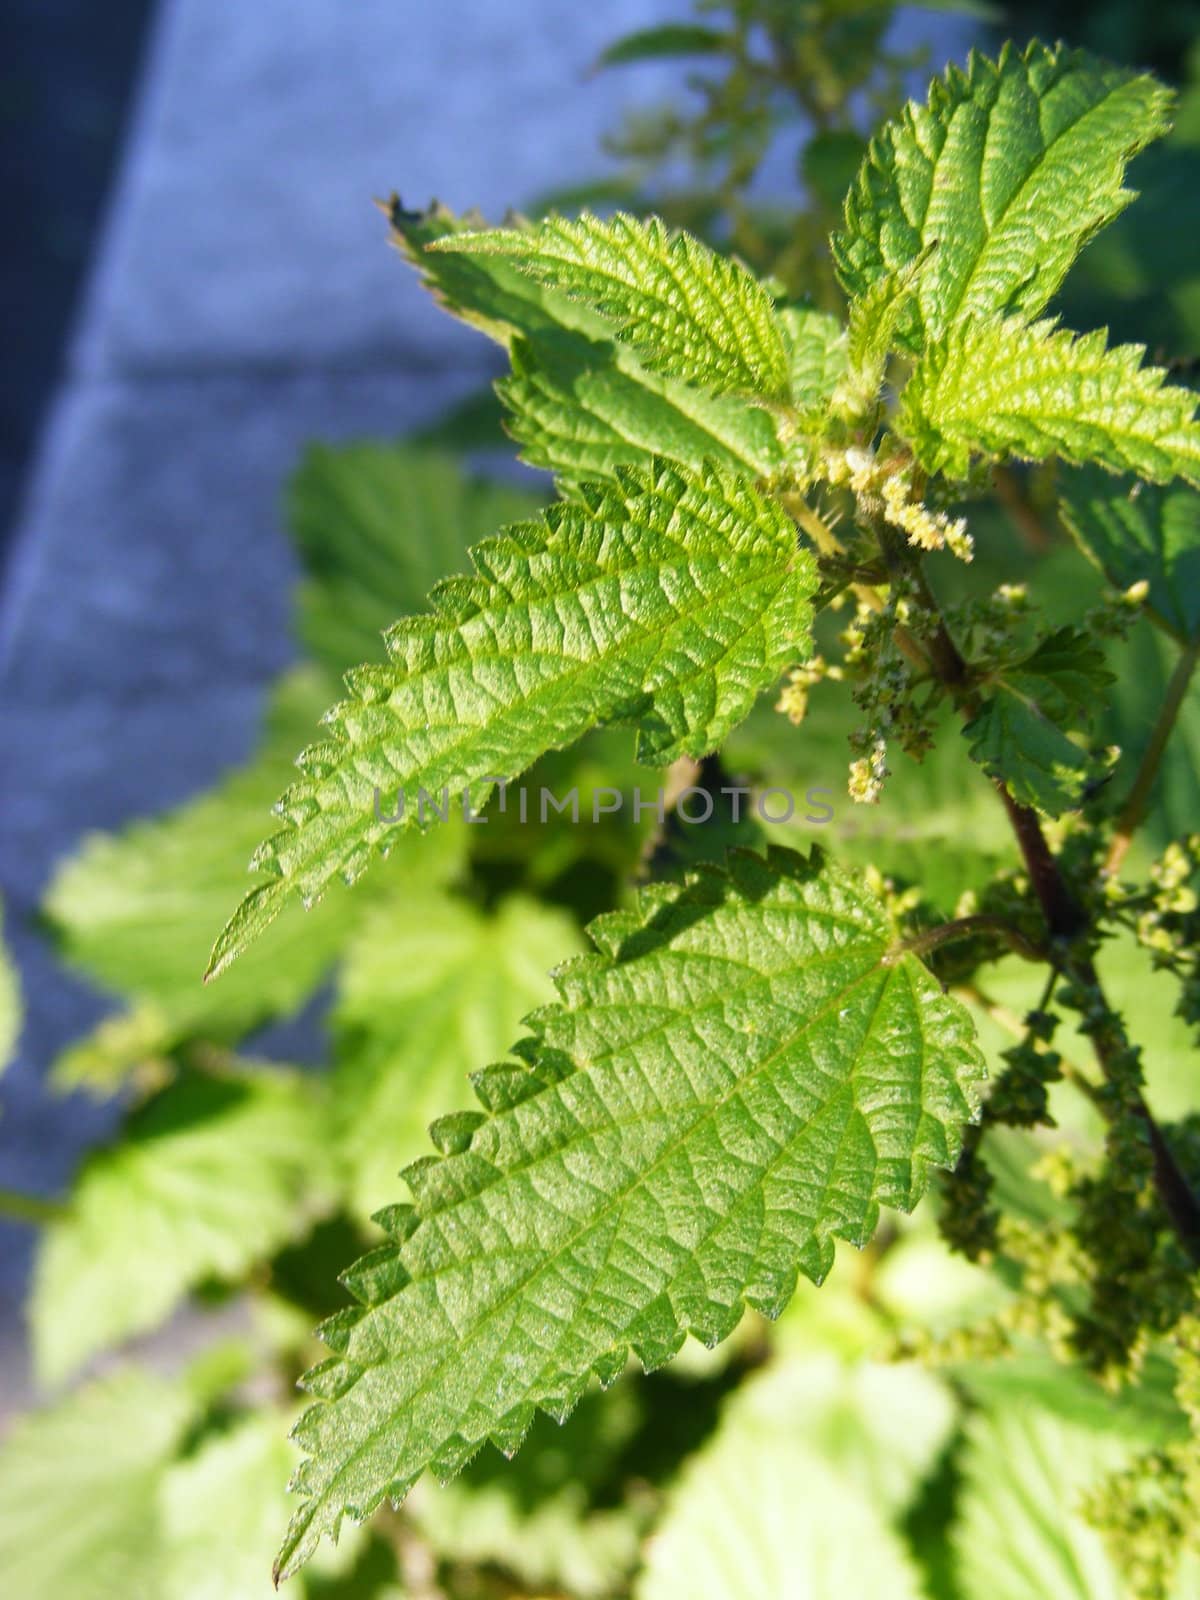 A macro photograph of lots of nettles.